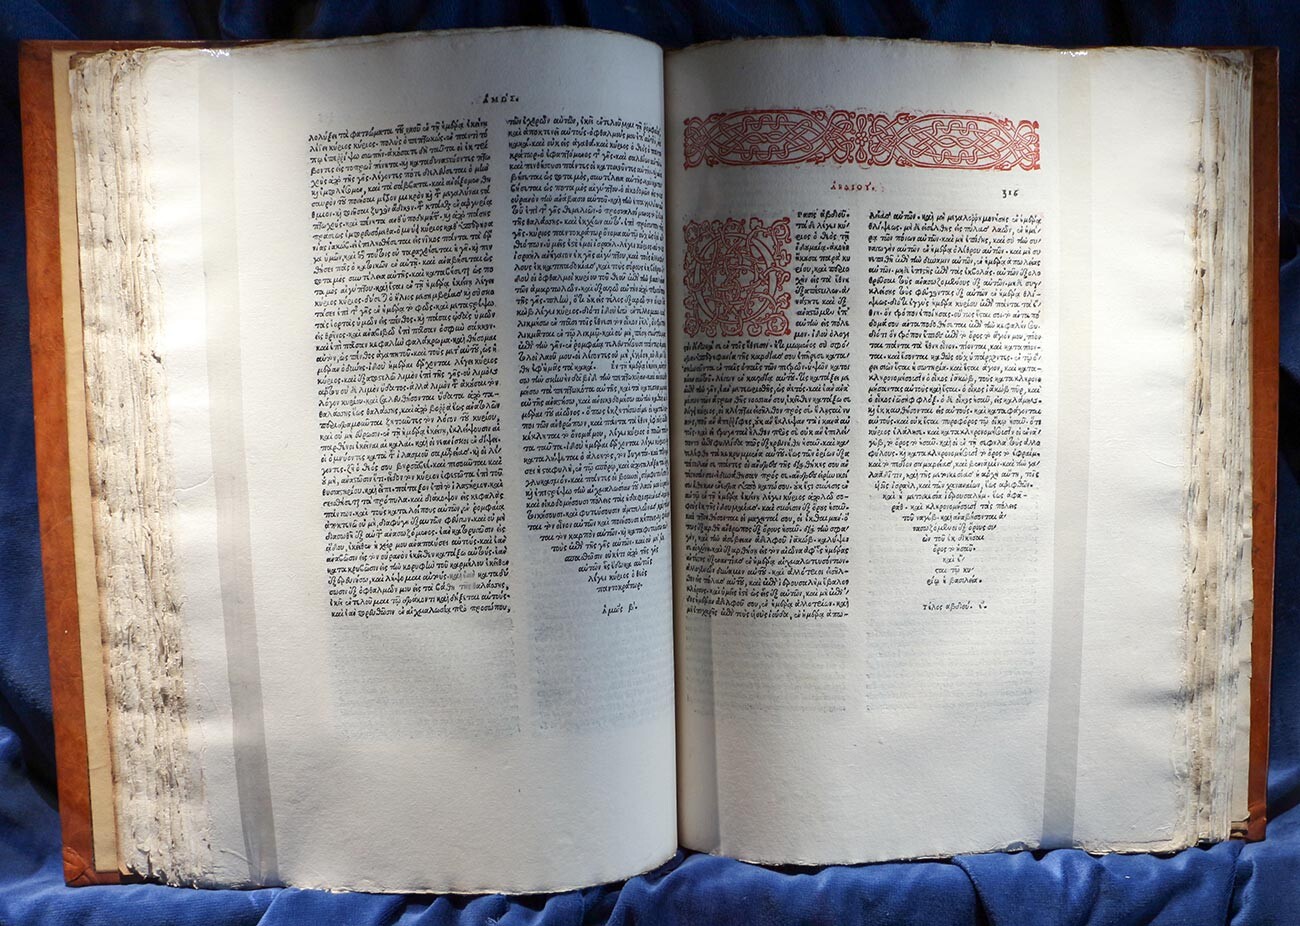 The Aldine Bible, an edition of the Bible in Greek begun by Aldus Manutius, and published in Venice in 1518 by the Aldine Press. It is the first complete Bible printed entirely in Greek (the Old Testament in the Septuagint) to be published. 